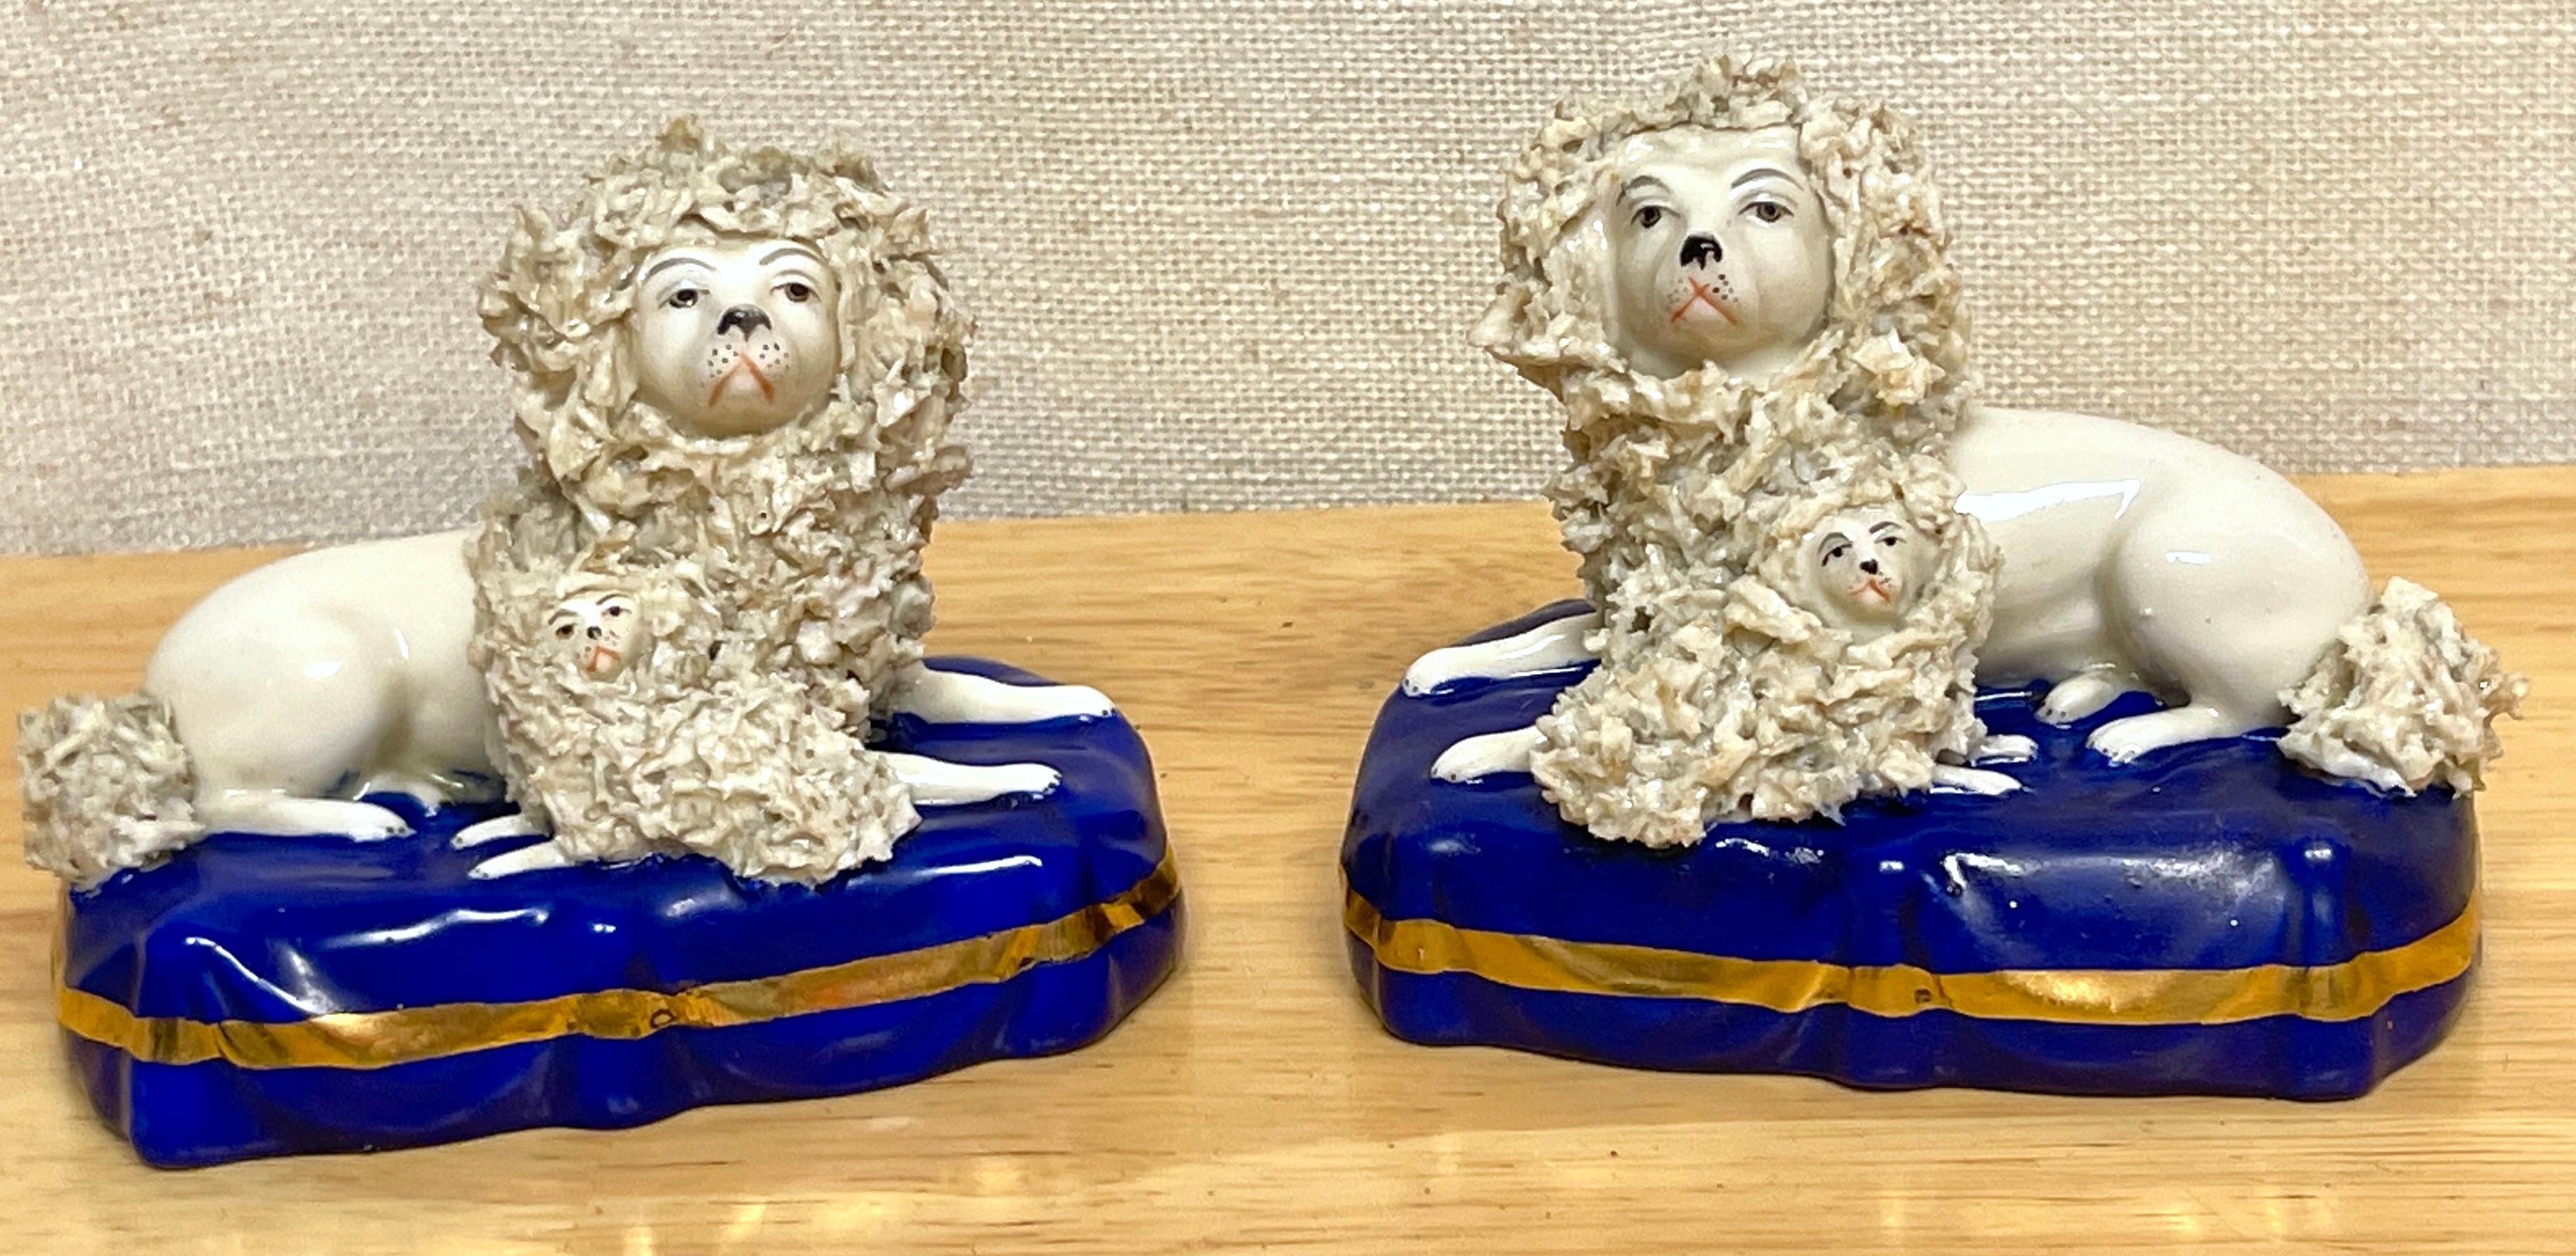 Pair of 19th century Chelsea Porcelain figures of seated poodles & pups 
England, Circa 1850s
A rare find, a true pair of Chelsea Porcelain (Attributed) poodles and pups.
Both figures well painted, with applied 'porcelain fur' recumbent with a